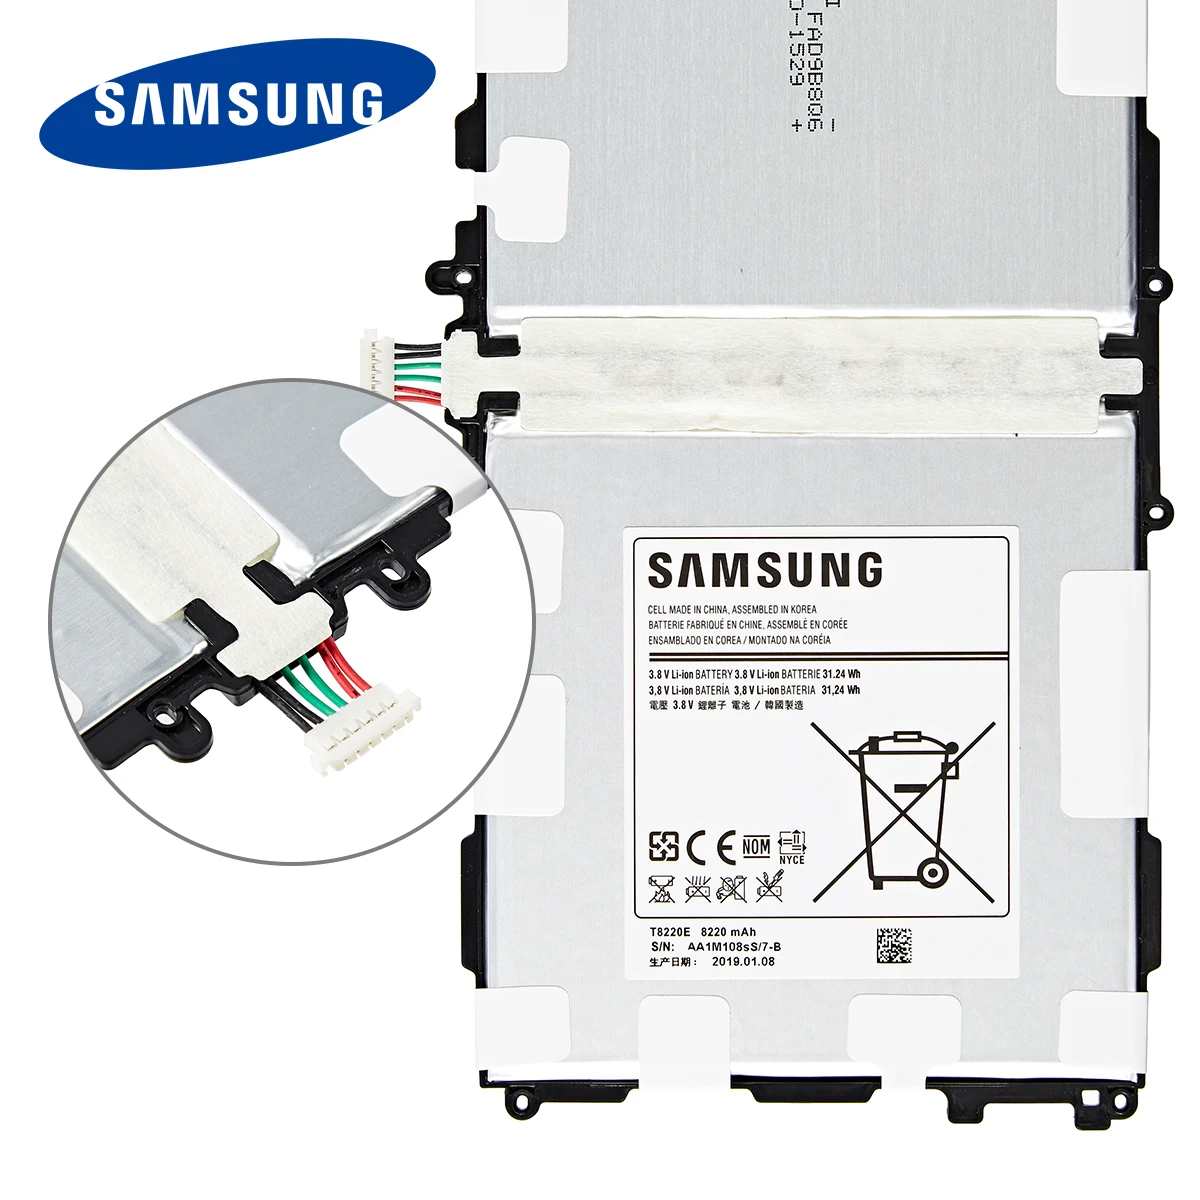 SAMSUNG Orginal Tablet T8220E T8220C T8220U Battery 8220mAh For Samsung GALAXY Note 10.1 Tab Pro P600 P601 P605 P607 T520 T525 cell phone battery pack